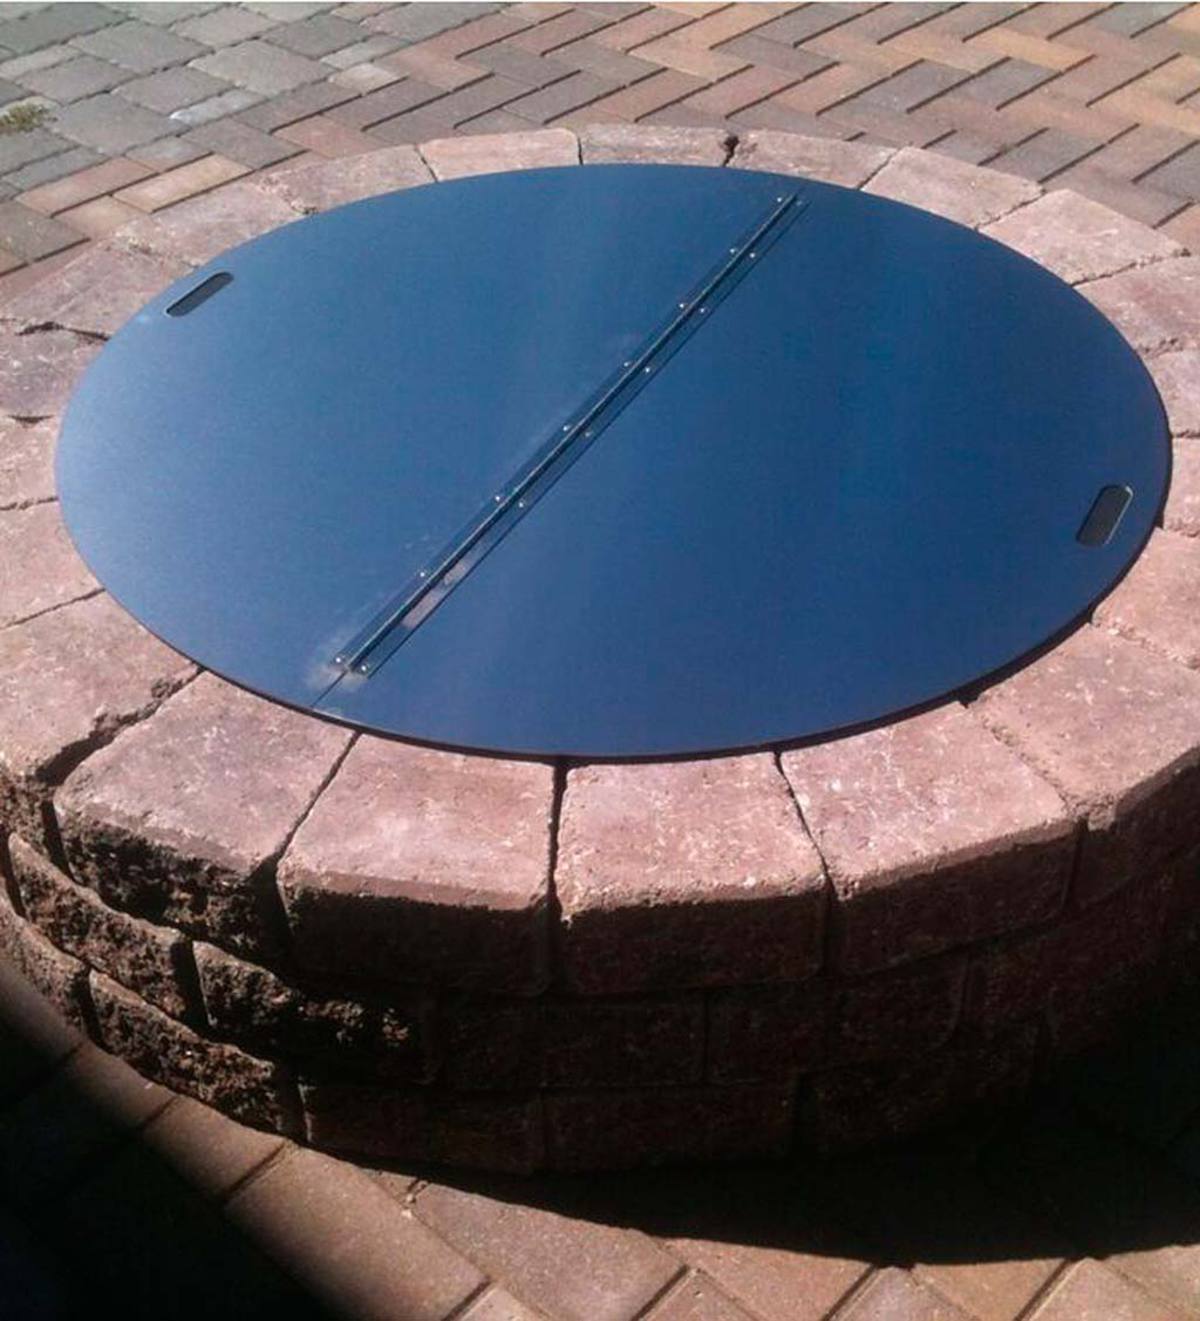 Stainless Steel Round Fire Pit Cover, Fire Pit Cover Round Metal